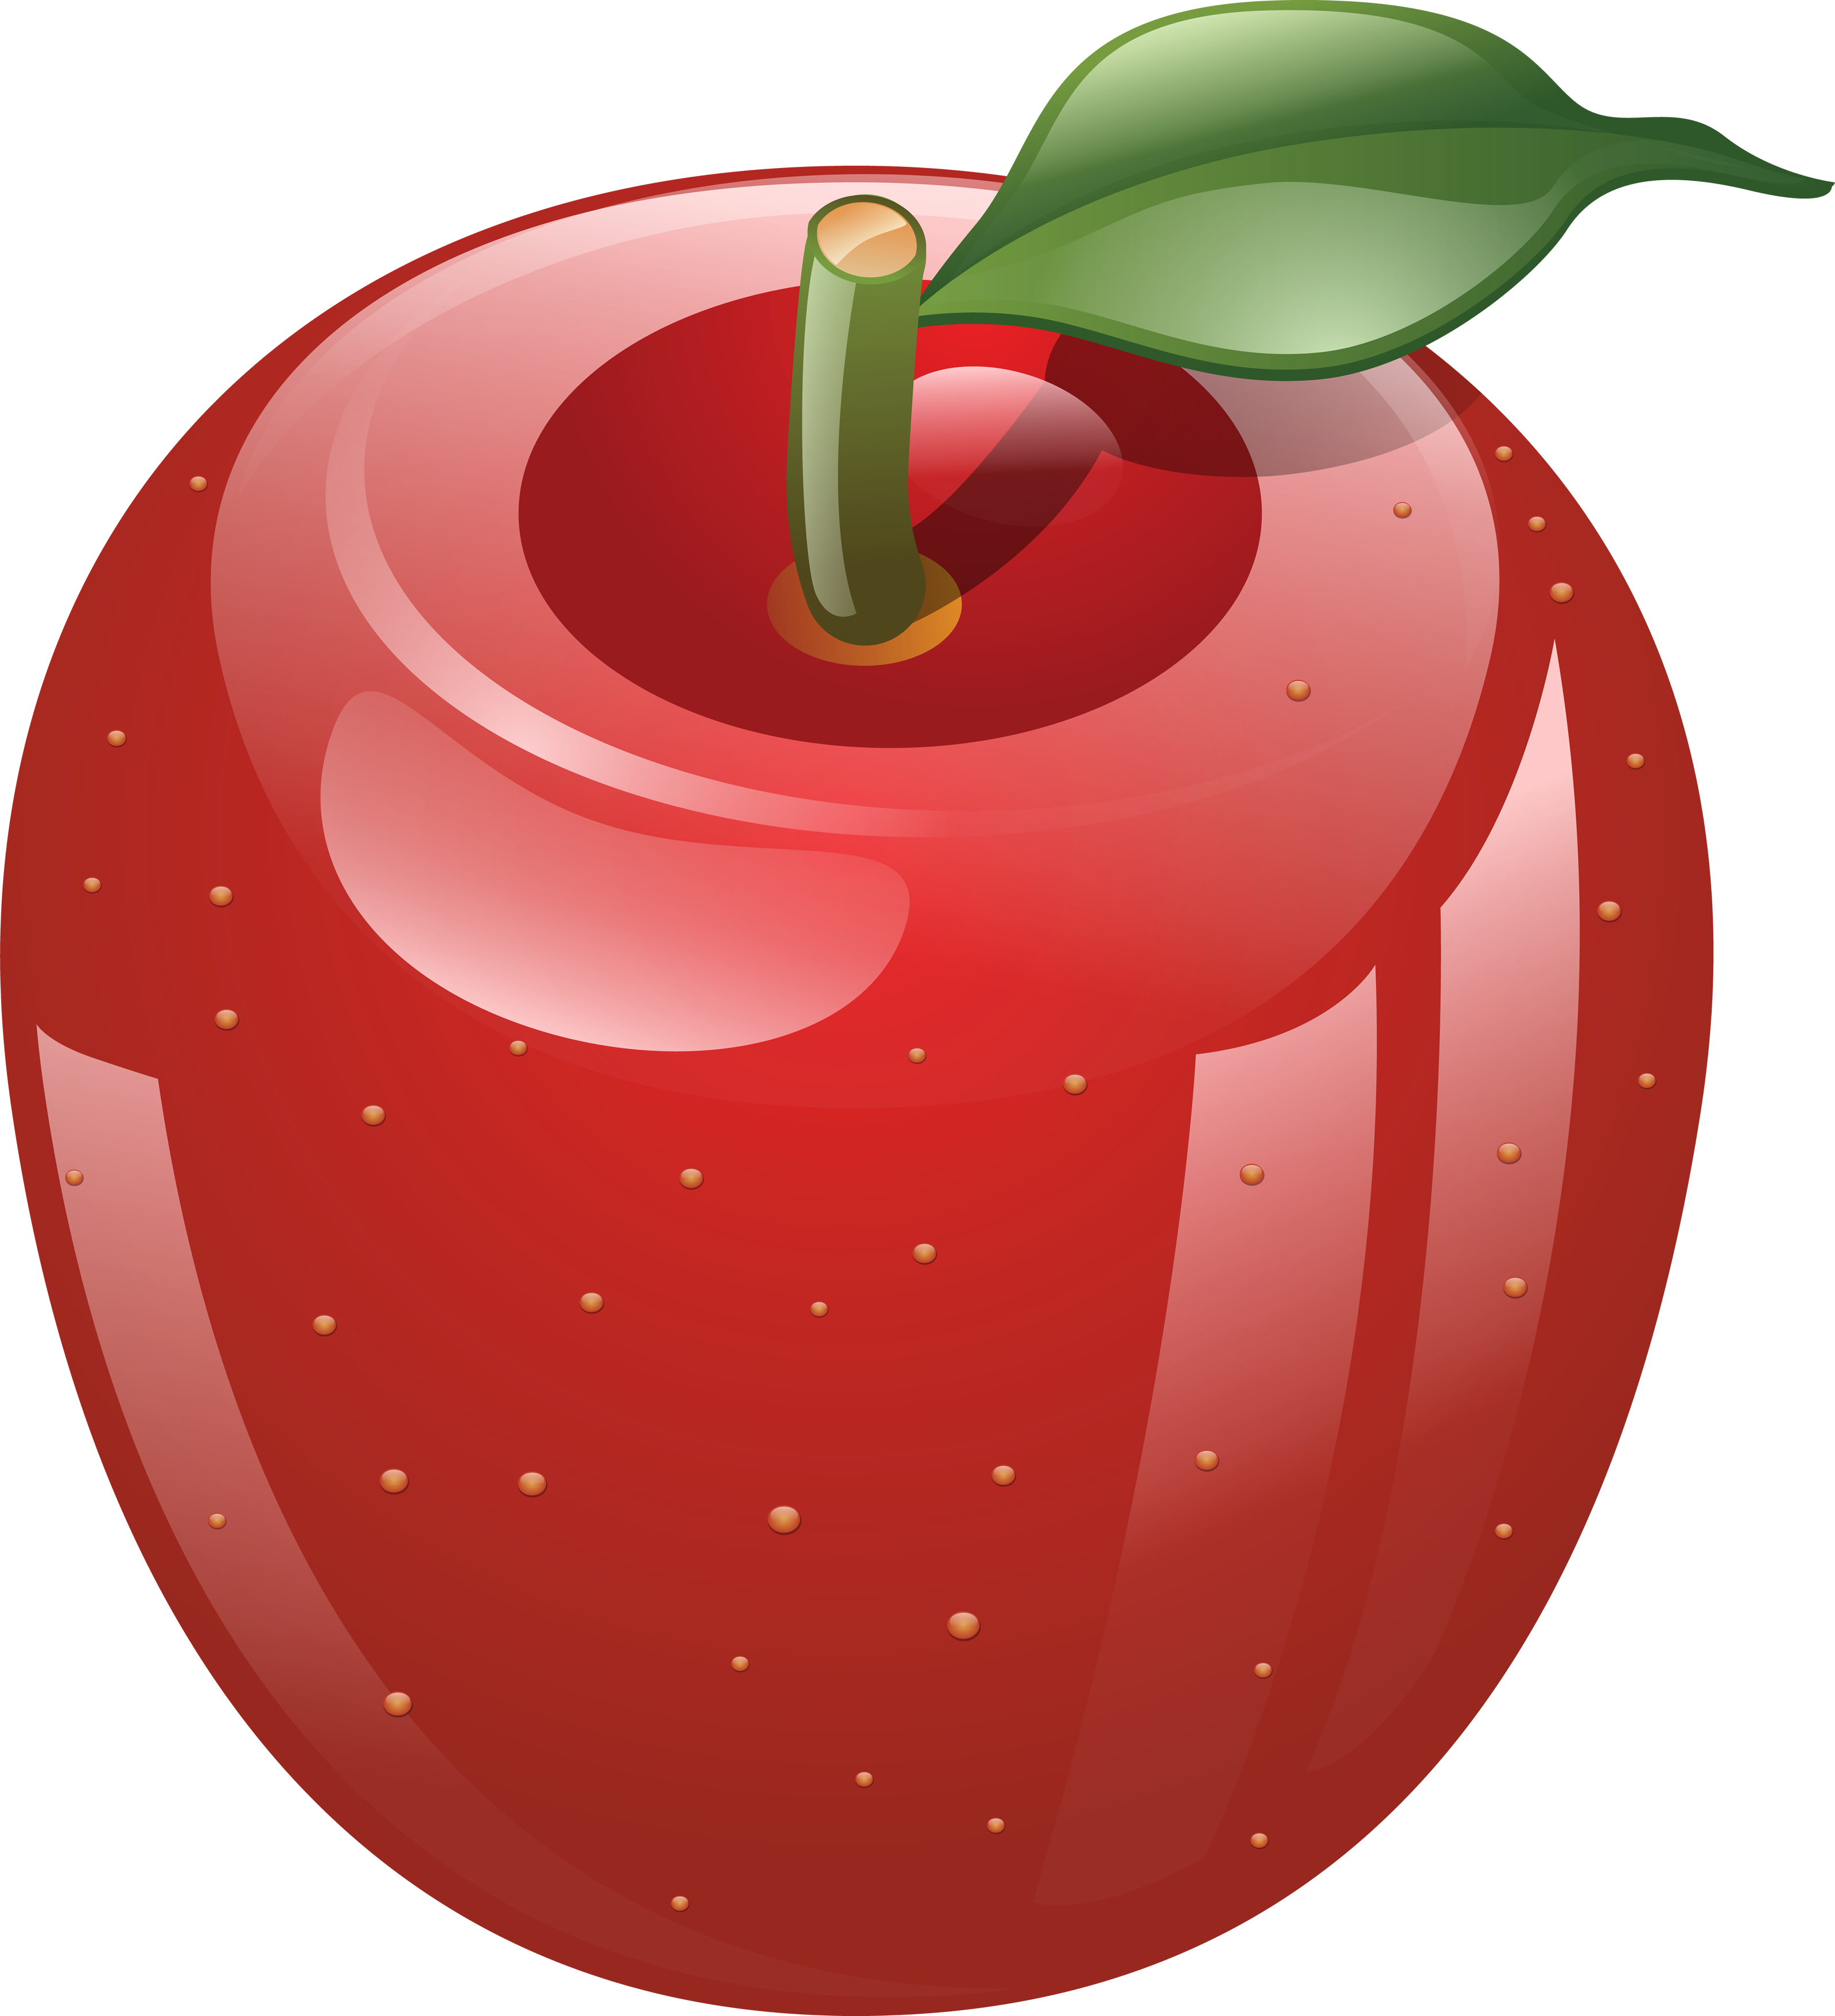 Teacher Apple Images 2 Free Download Png Clipart